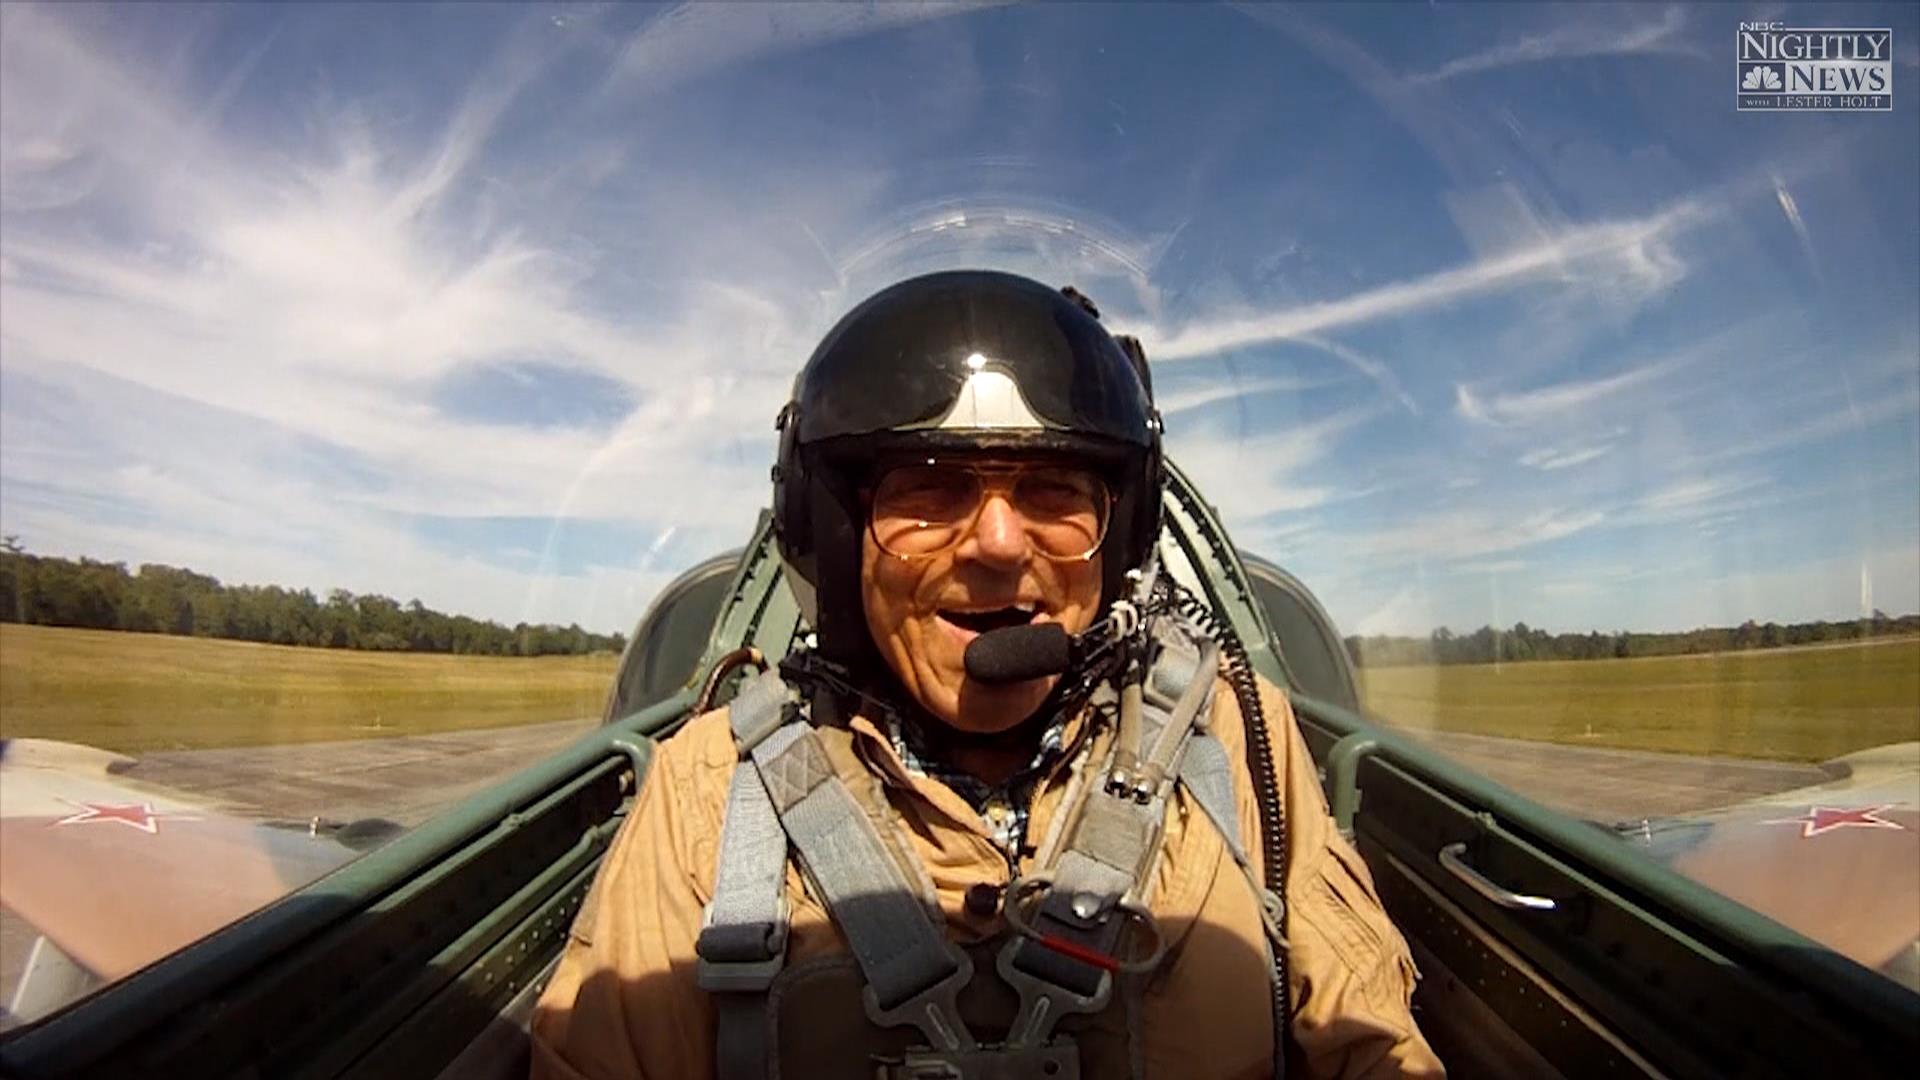 96-Year-Old Veteran Pilot Flies Fighter Jet for First Time